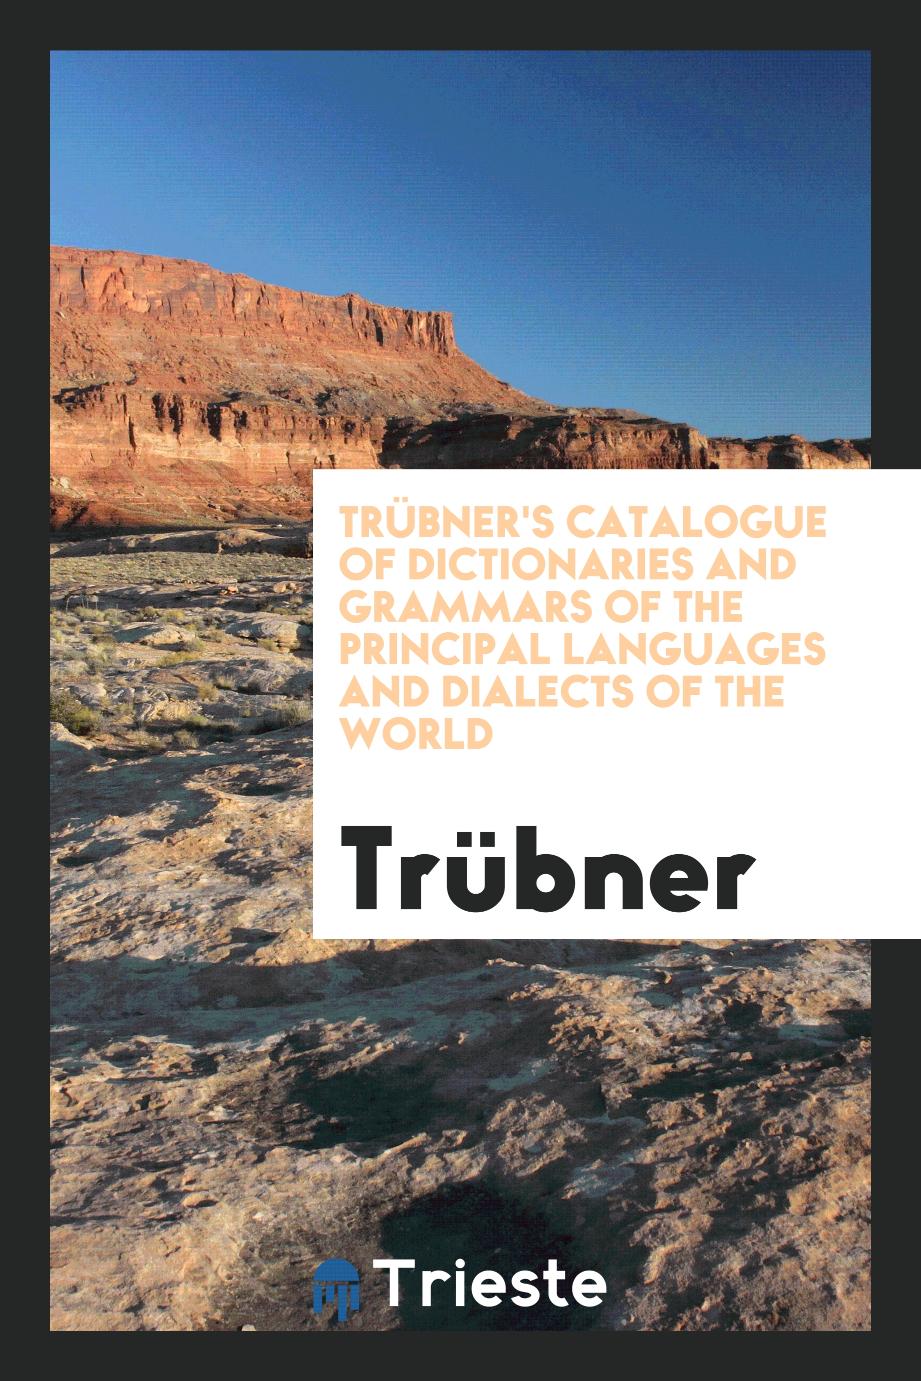 TrüBner's Catalogue of Dictionaries and Grammars of the Principal Languages and Dialects of the World